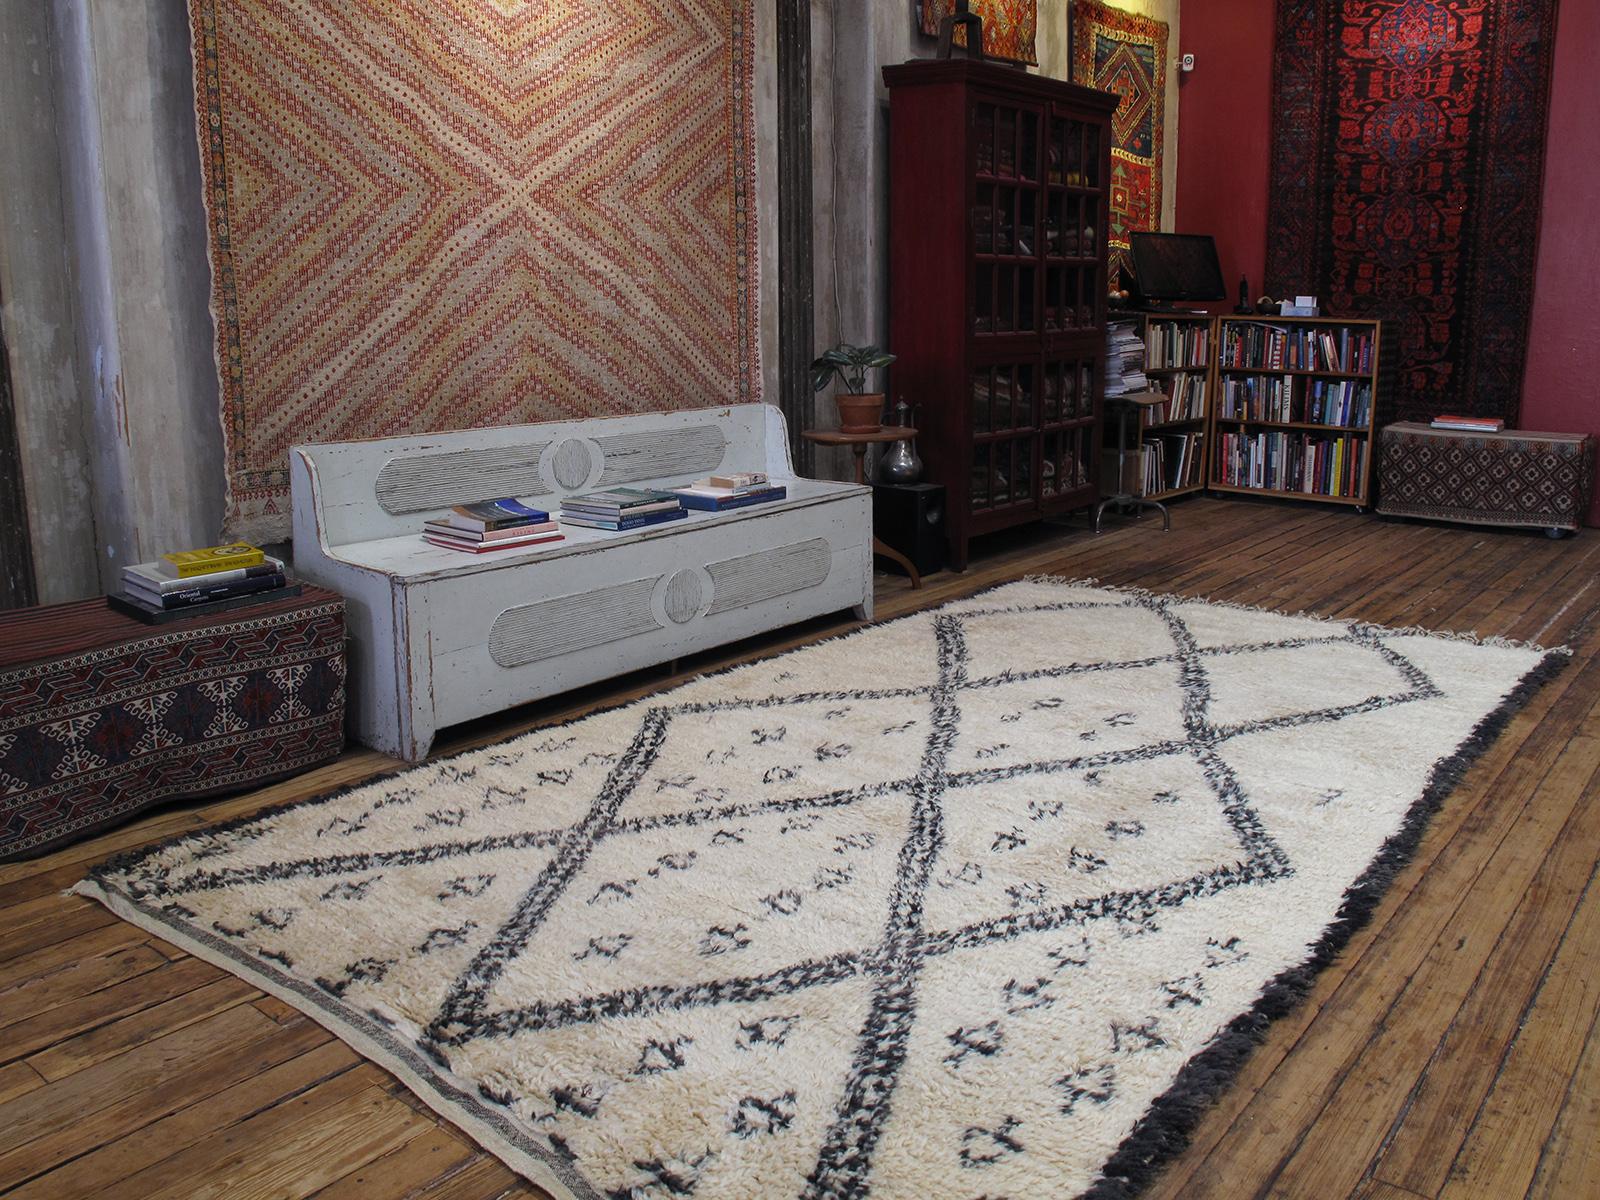 A great old example of Moroccan Berber weaving, attributed to the Beni Ouarain tribes of the Middle Atlas. The Classic diamond grid pattern is enlivened here with unique details that are reminiscent of enigmatic rock carvings. The wool quality and